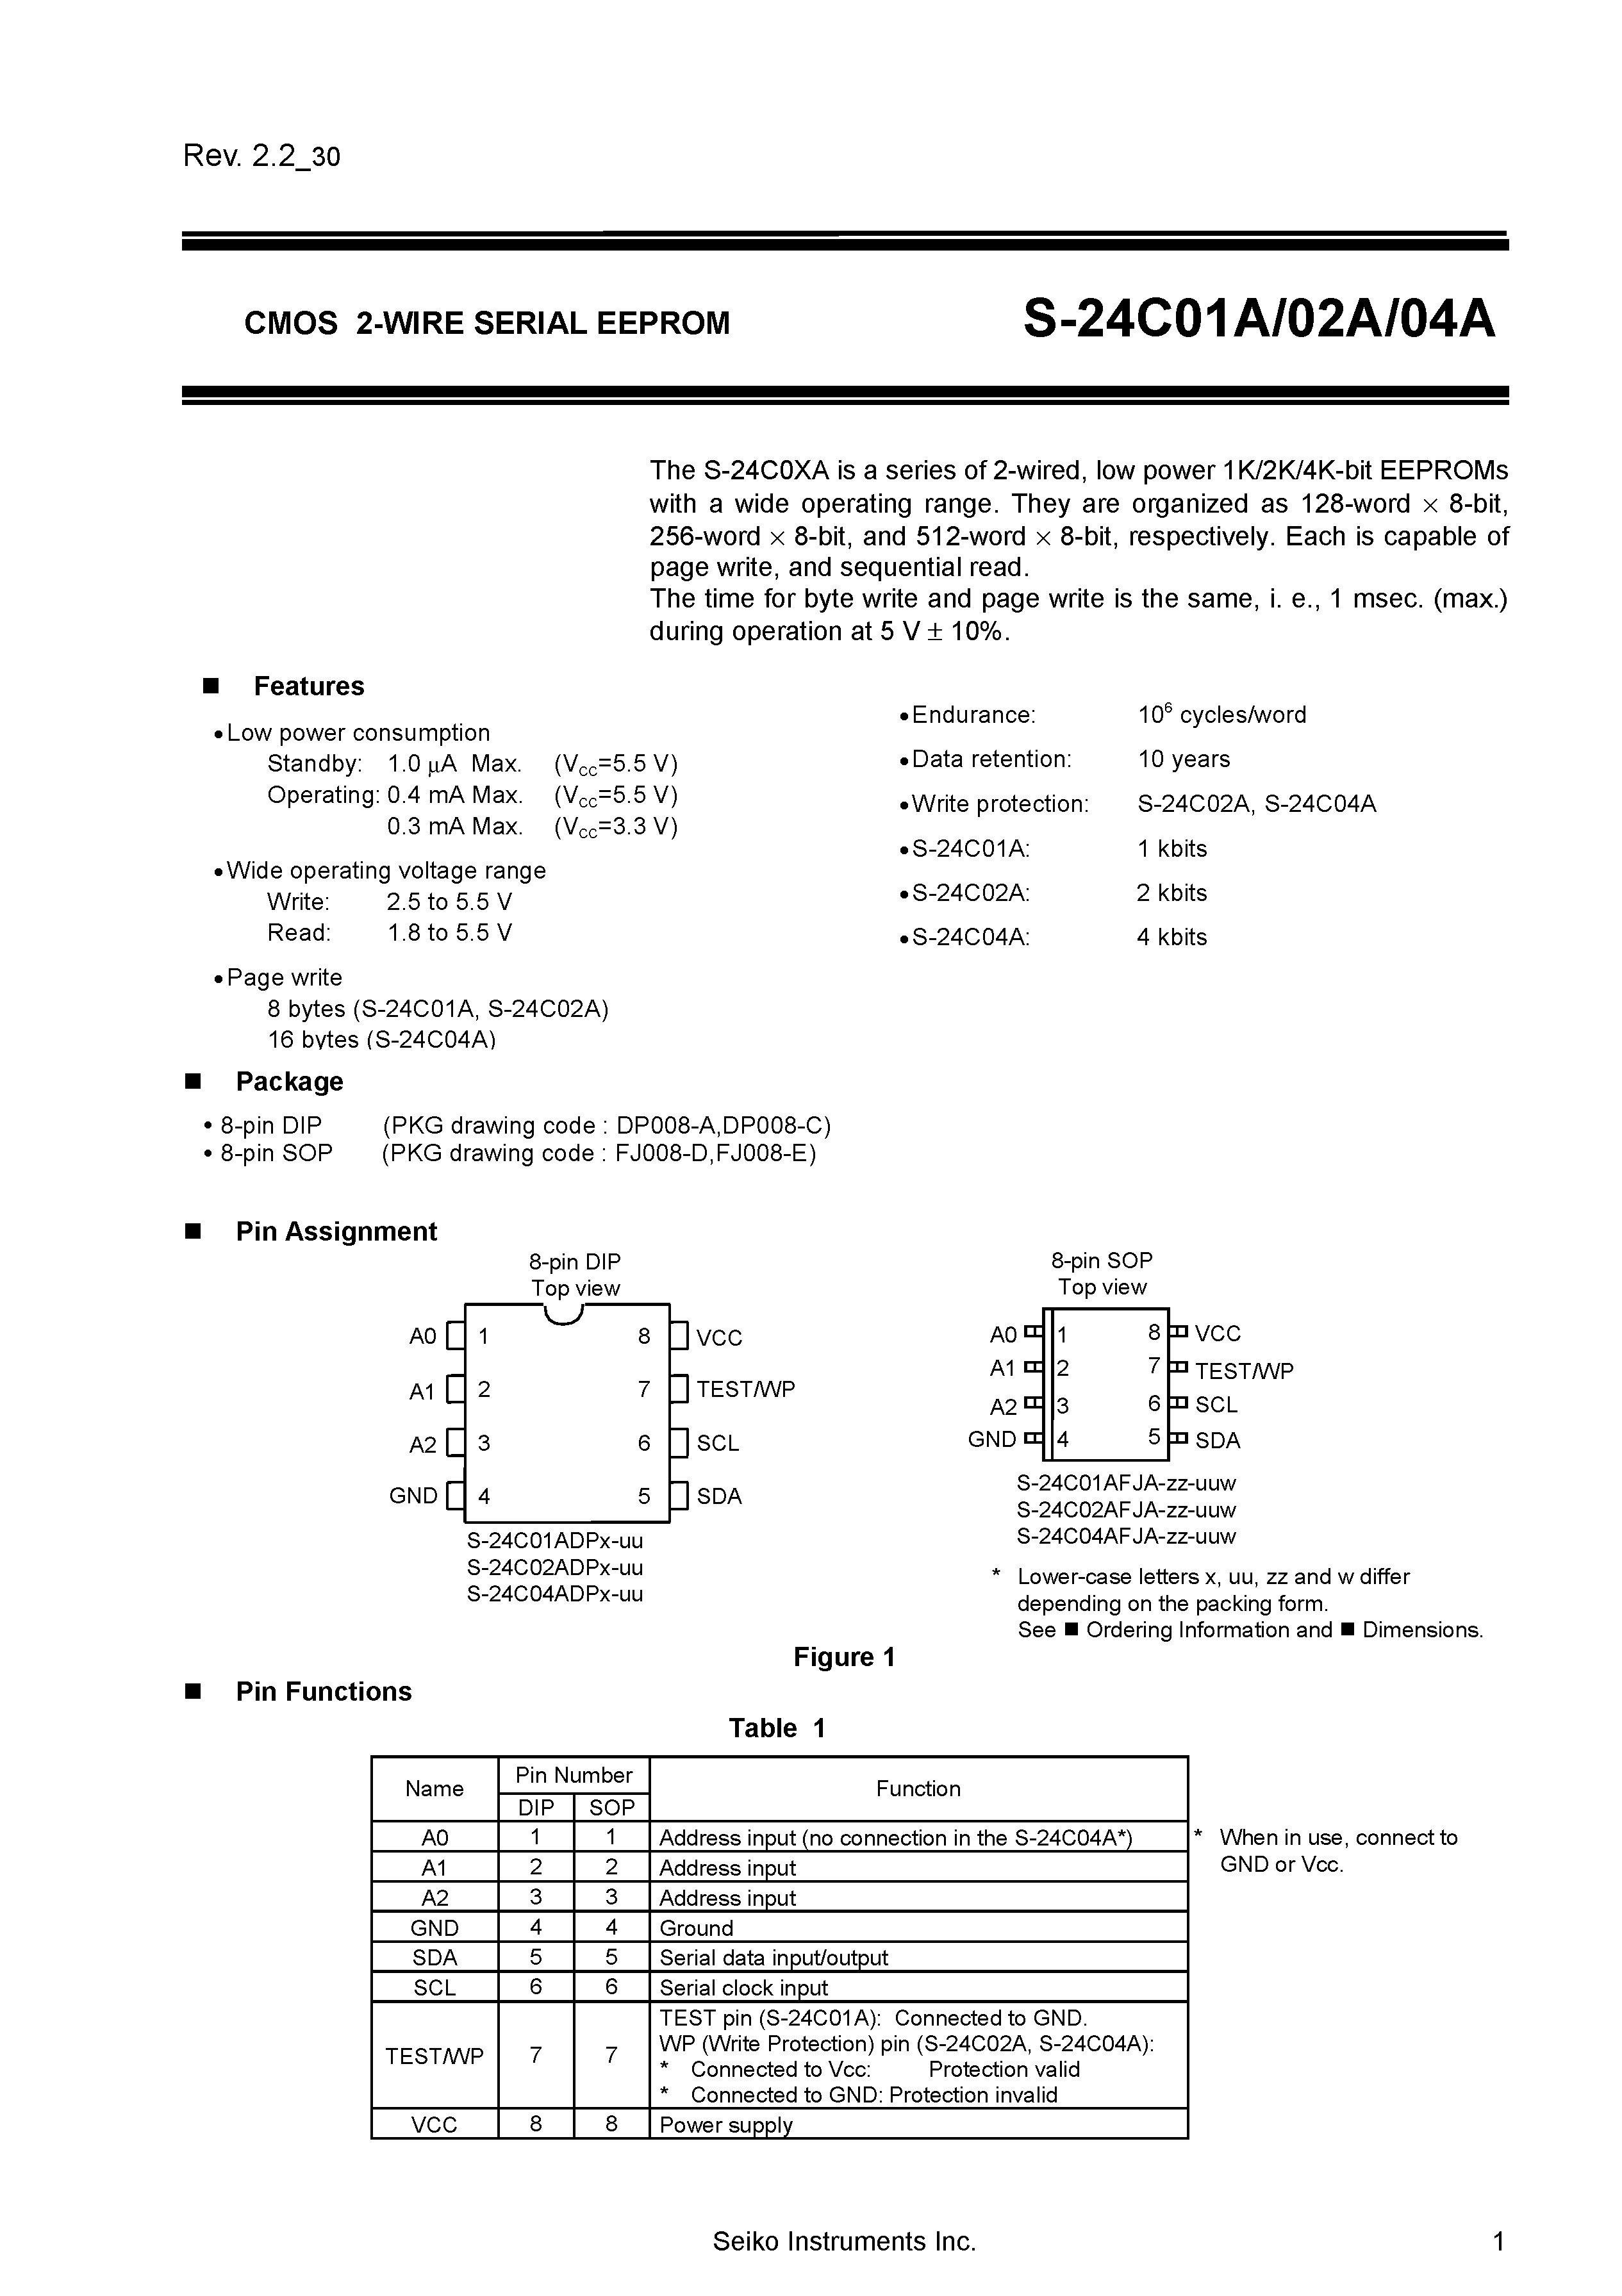 Datasheet S-24C01AFJA-TB11-S - CMOS 2-WIRE SERIAL EEPROM page 1